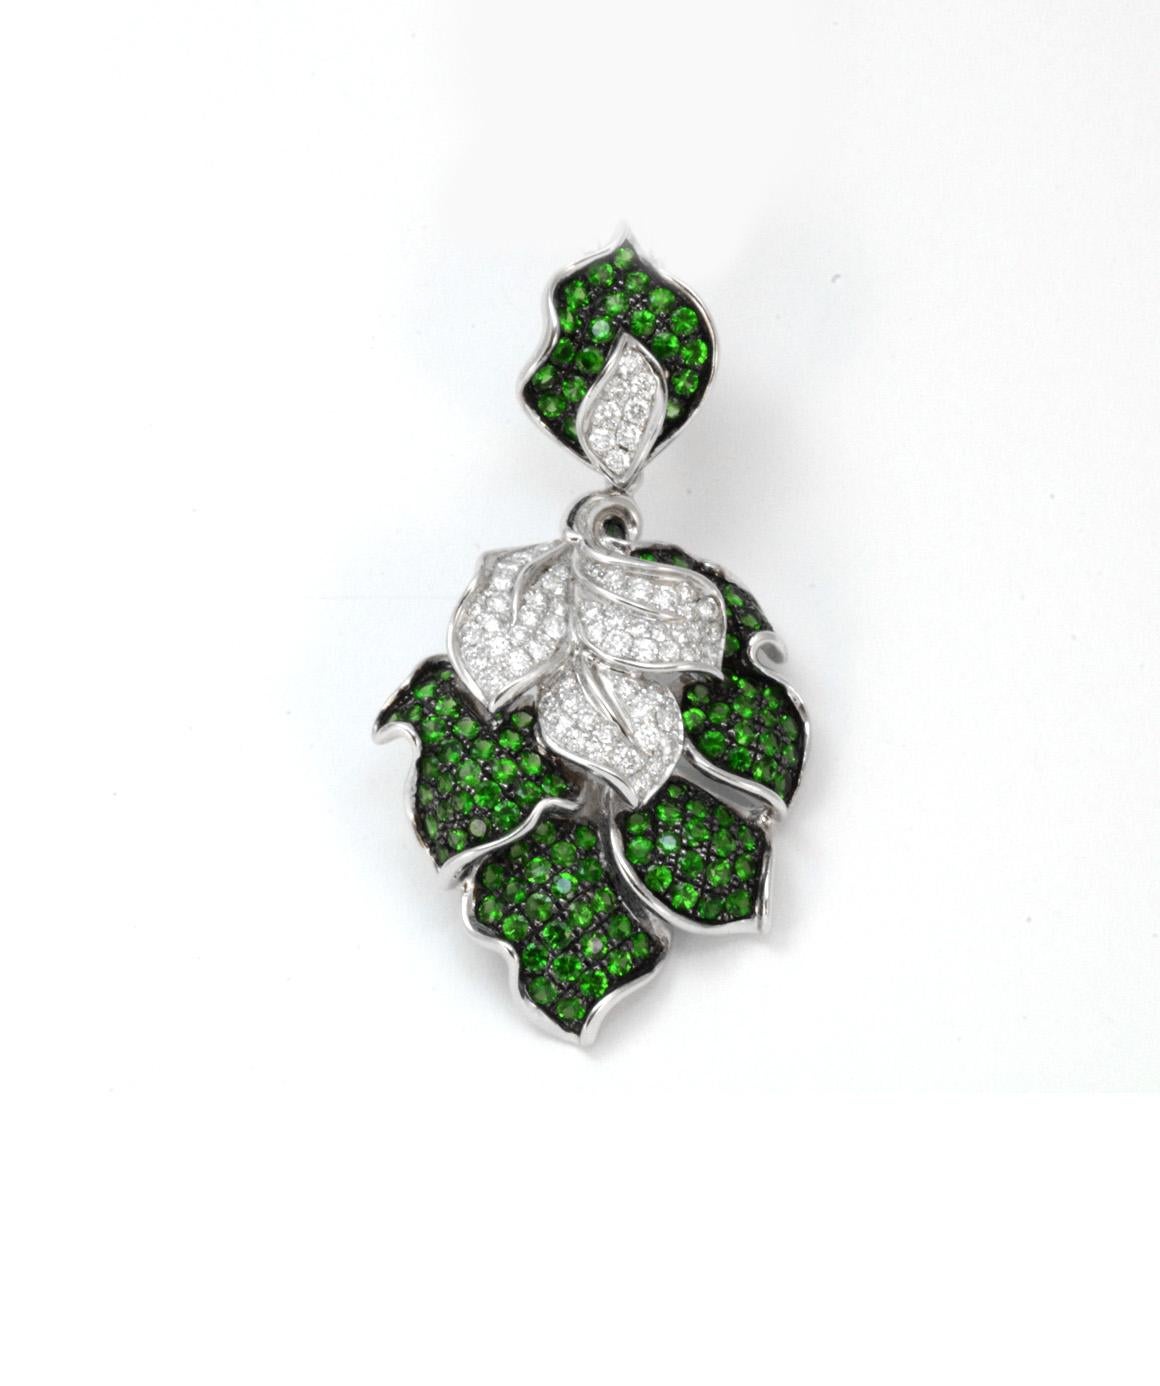 This solid 18K white gold Tsavorite Garnet & Genuine Diamond necklace is in excellent condition! The leaf style pendant measures 2.25 inches X 1.25 inches approximately. There are 117 genuine tsavorite garnets measuring approximately 2mm each. There